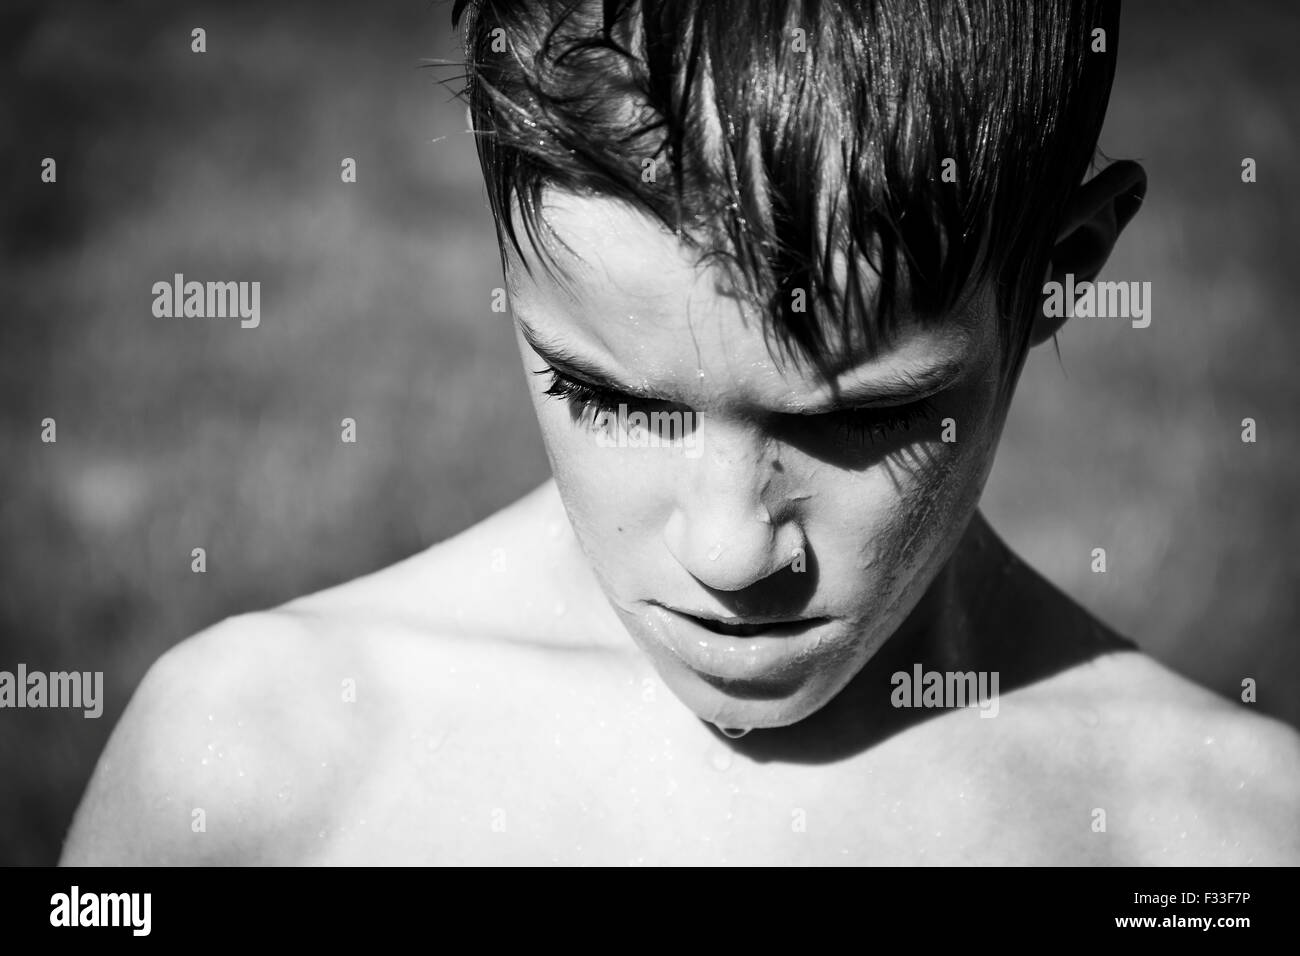 Young boy outdoors wet. Stock Photo